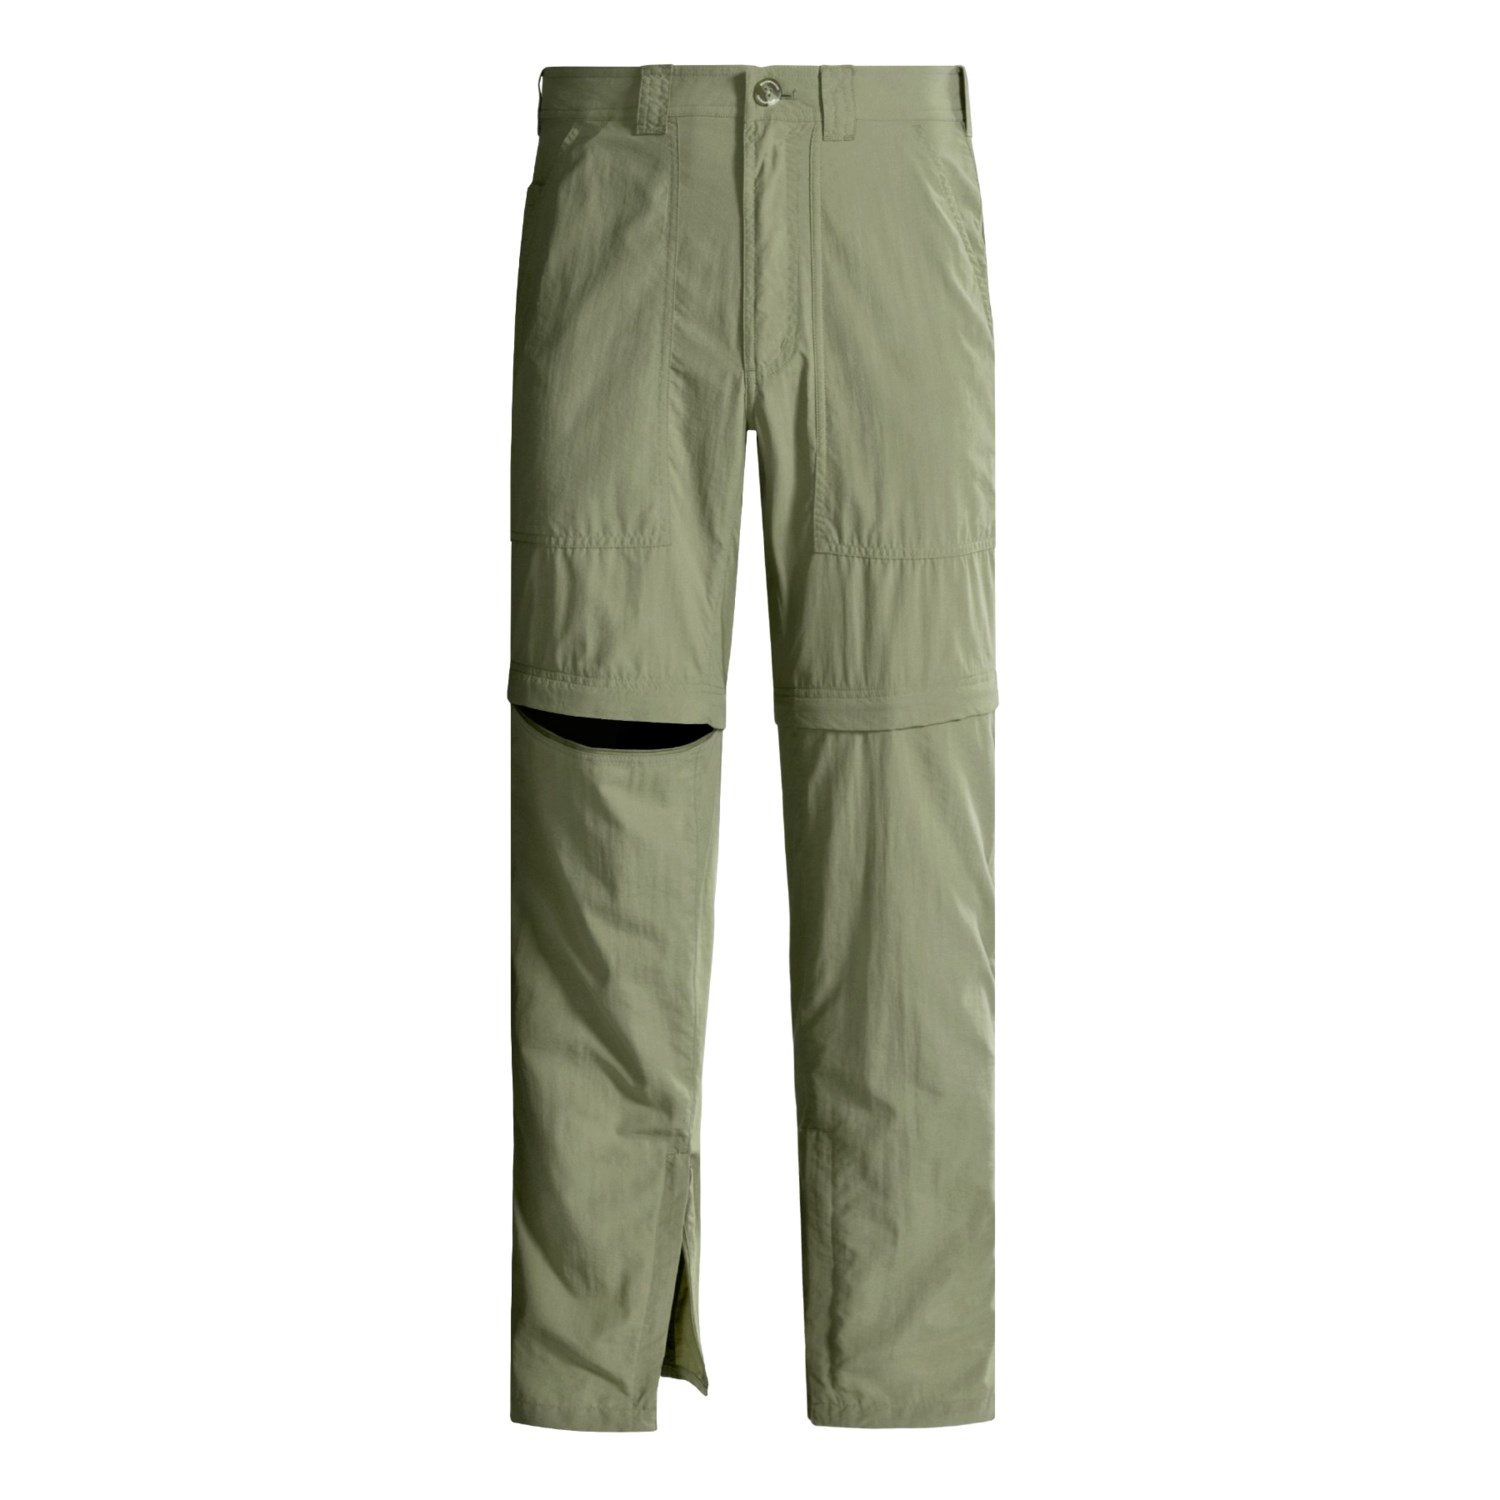 ExOfficio Insect Shield® Convertible Pants (For Men) 2133U - Save 35%